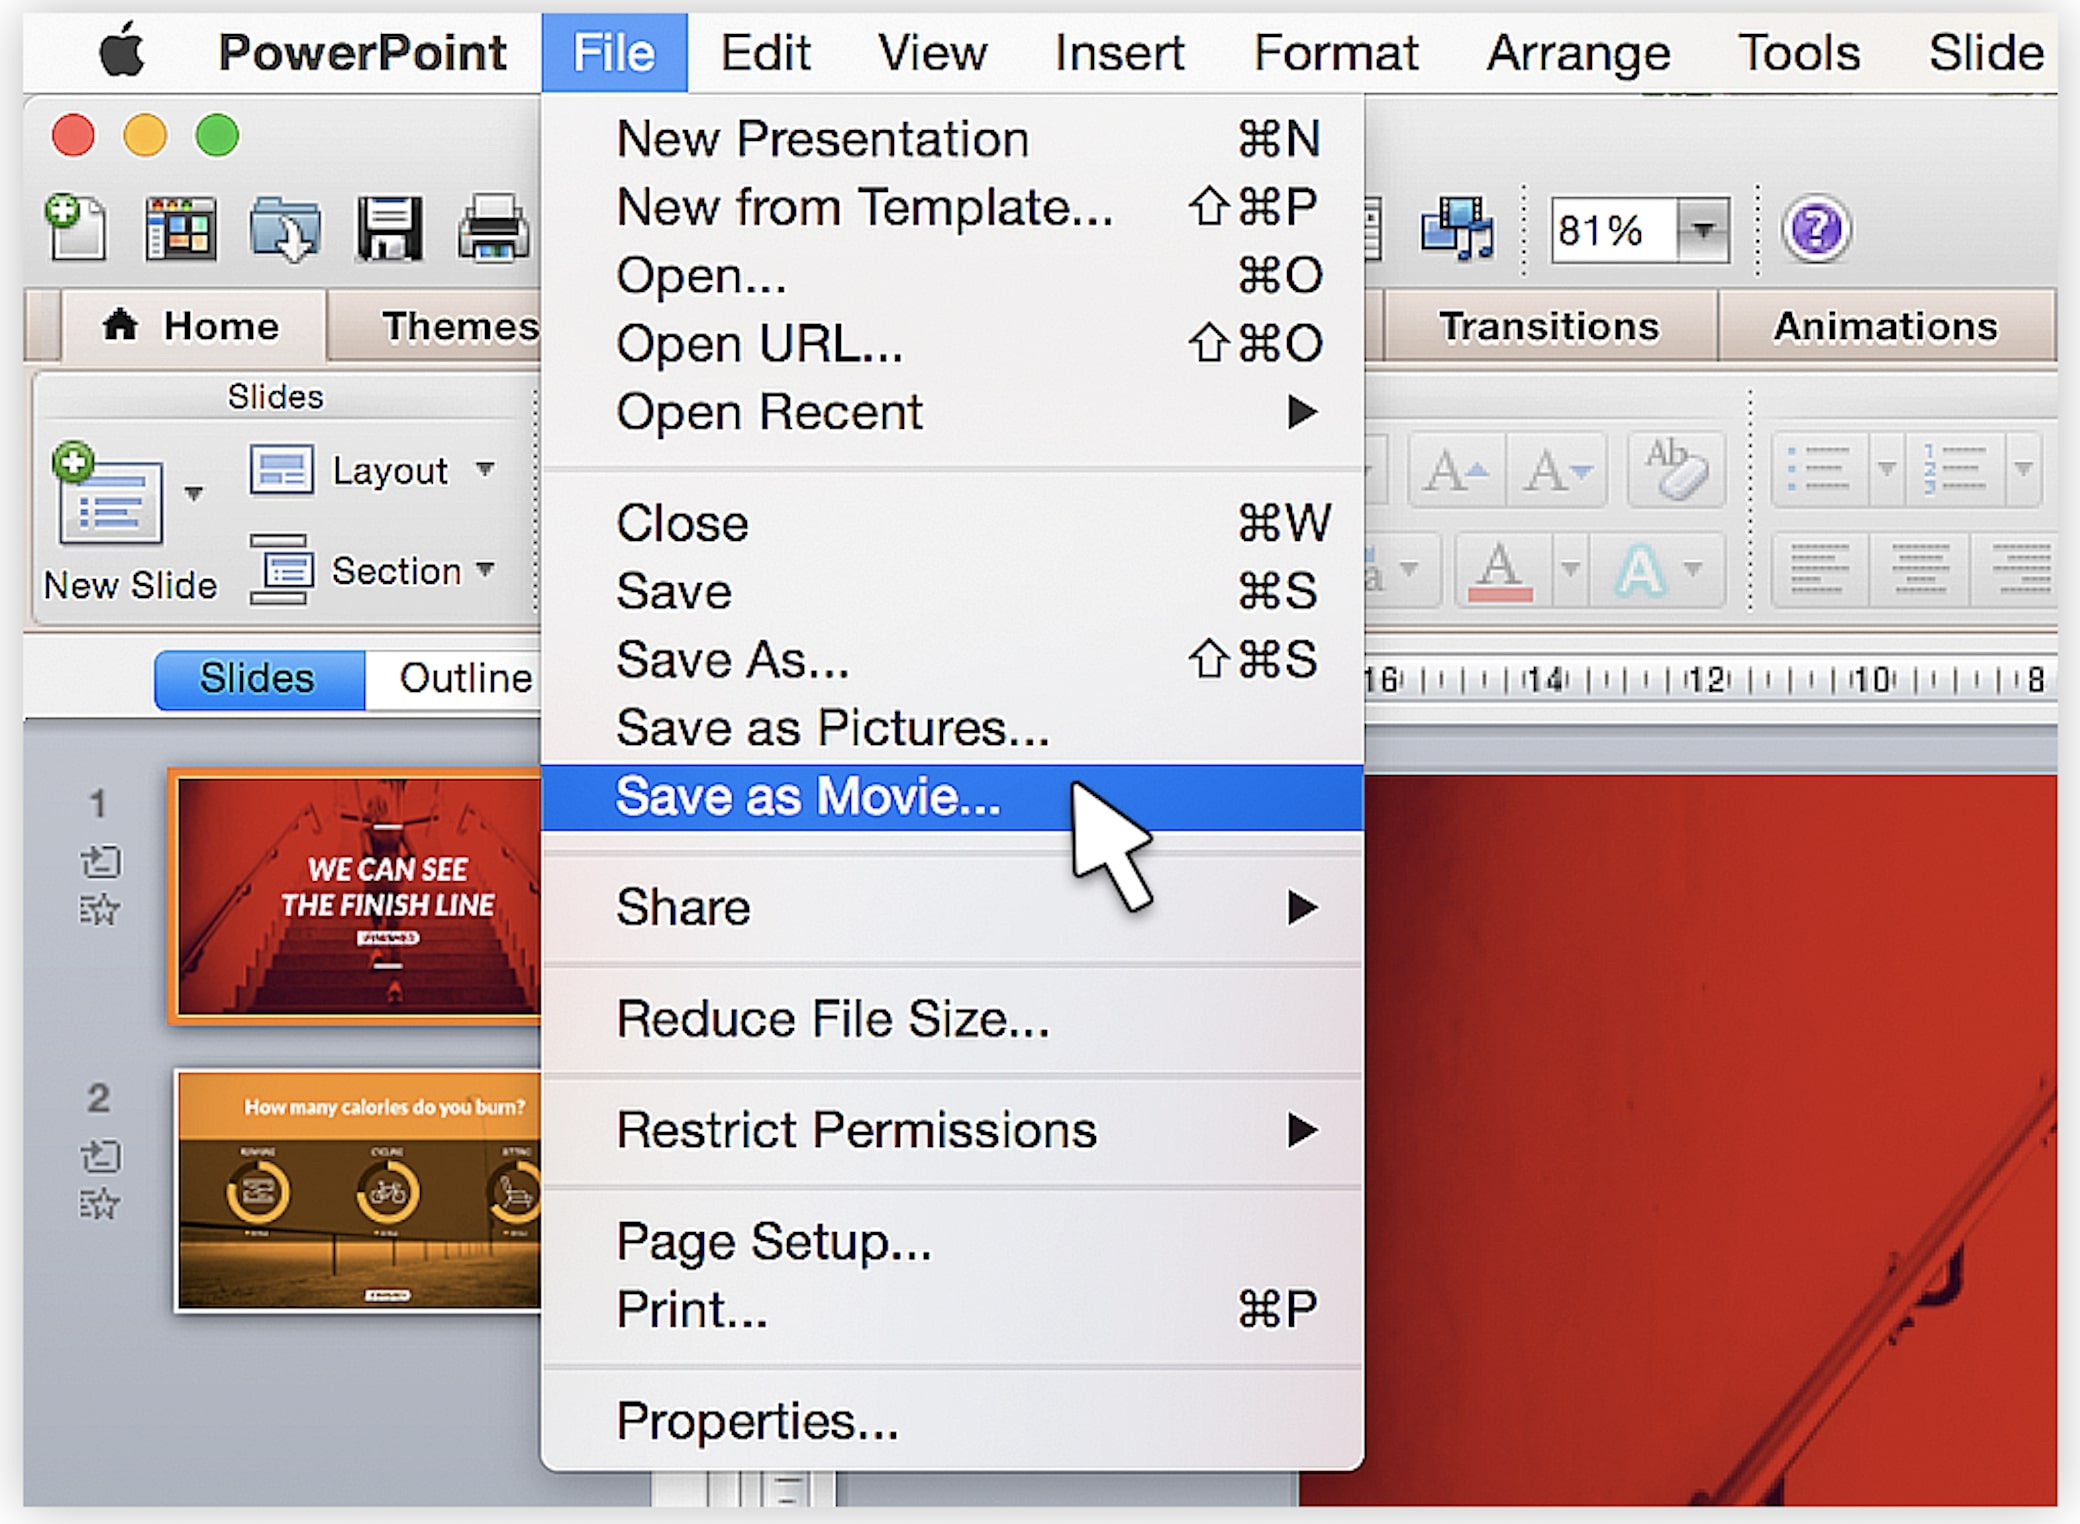  convert-ppsx-to-video-on-PowerPoint-mac 